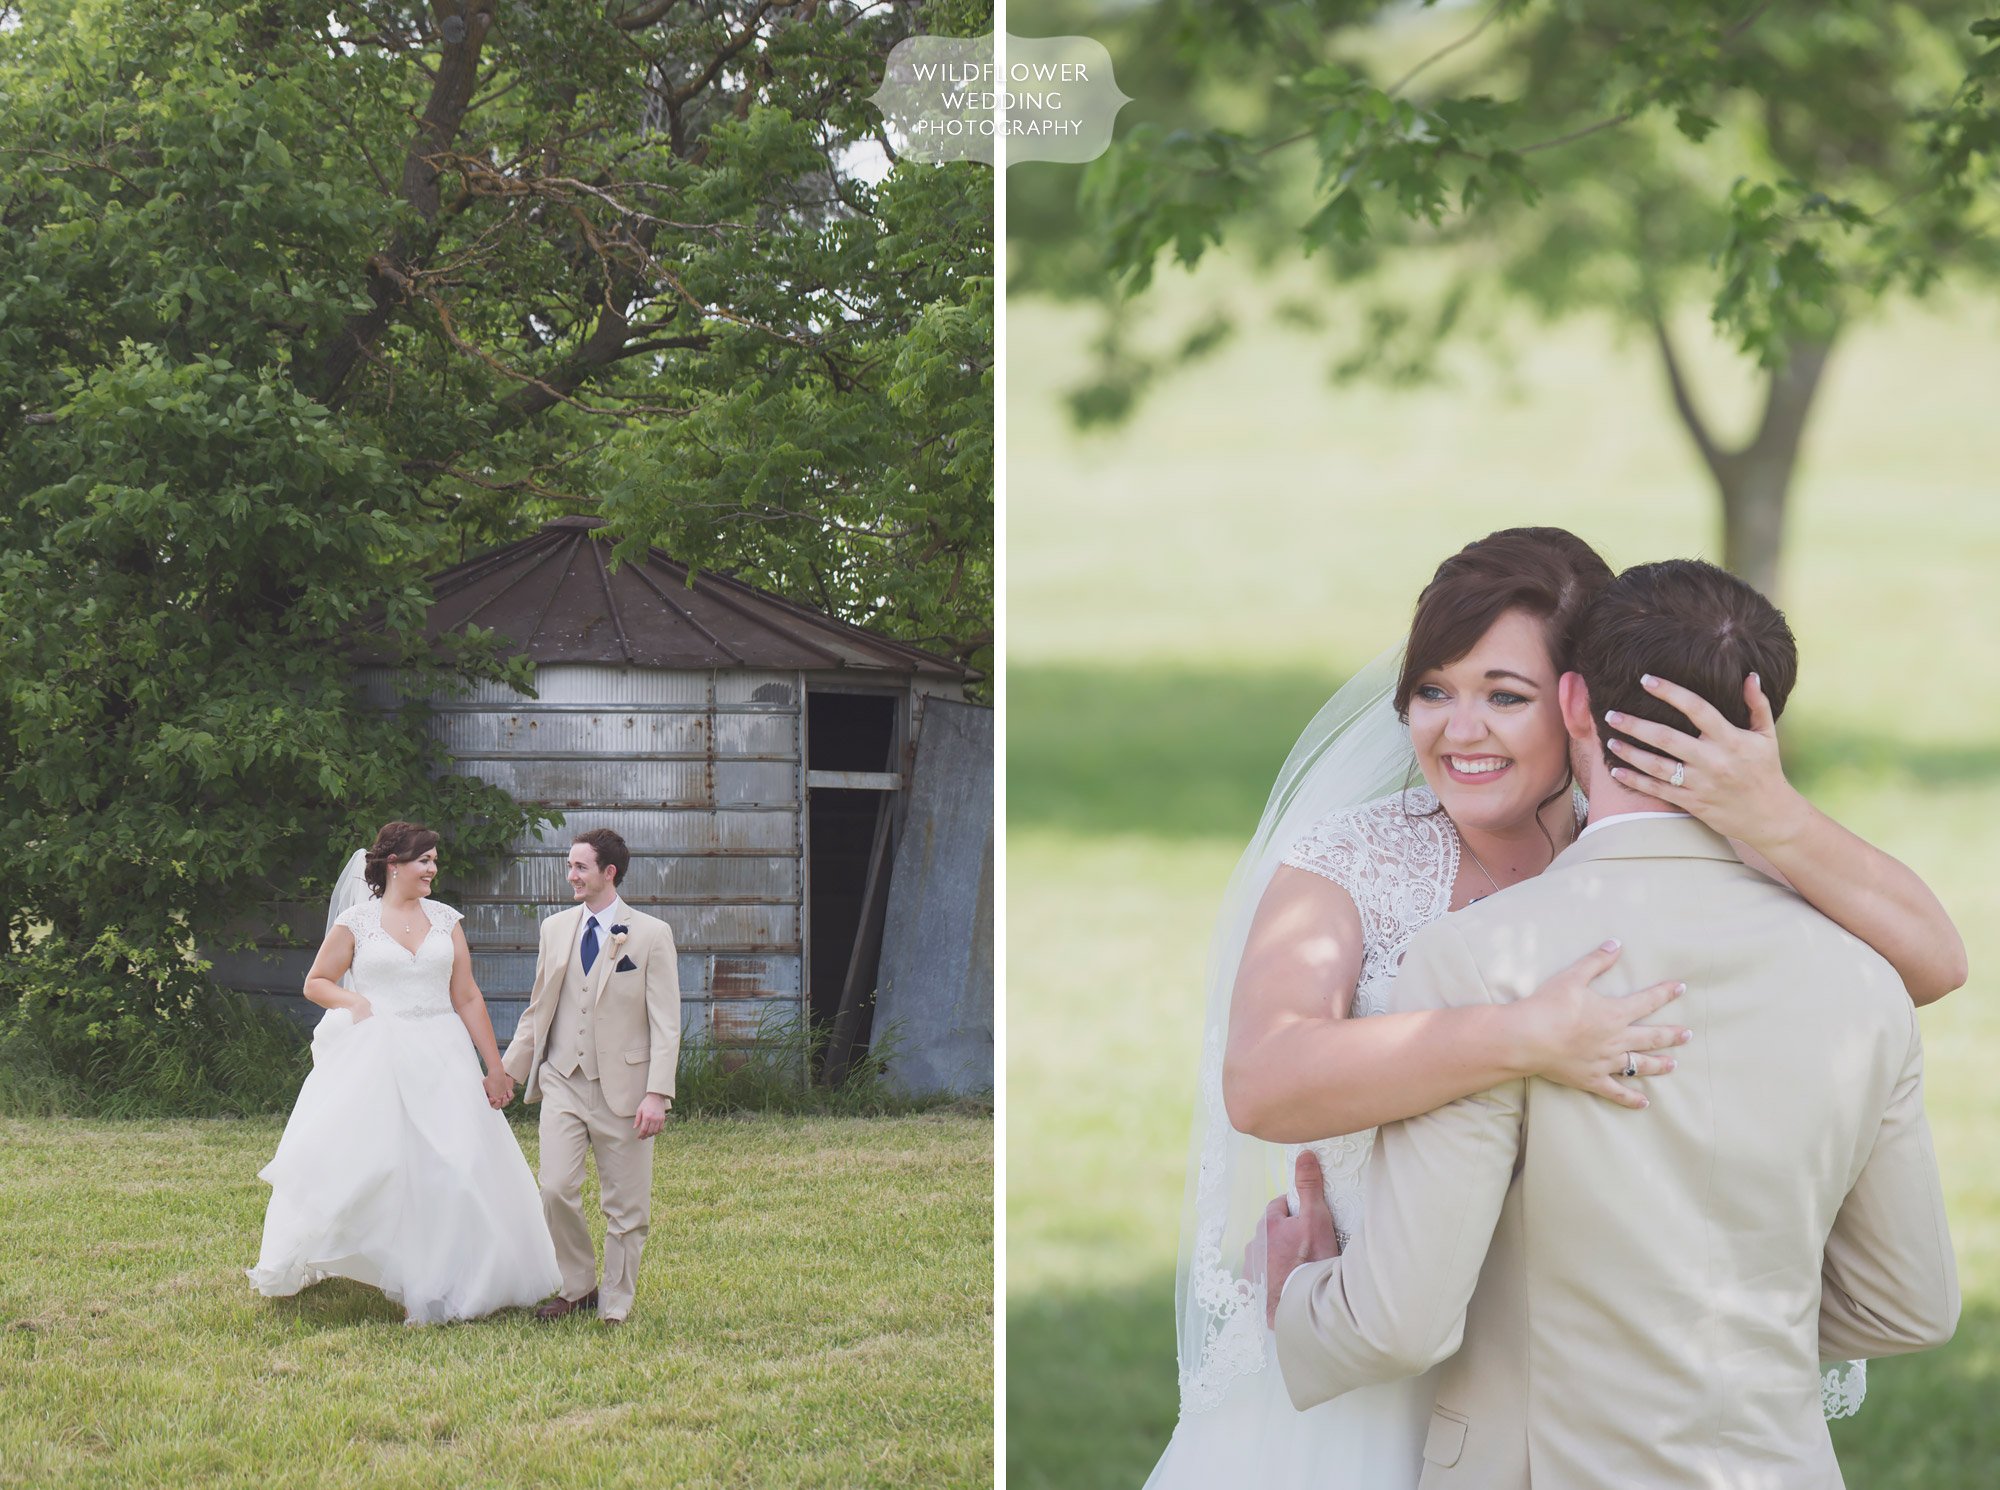 Documentary wedding photos of the bride and groom after the first look at this summer outdoor farm wedding at Bradford Research Farm venue.